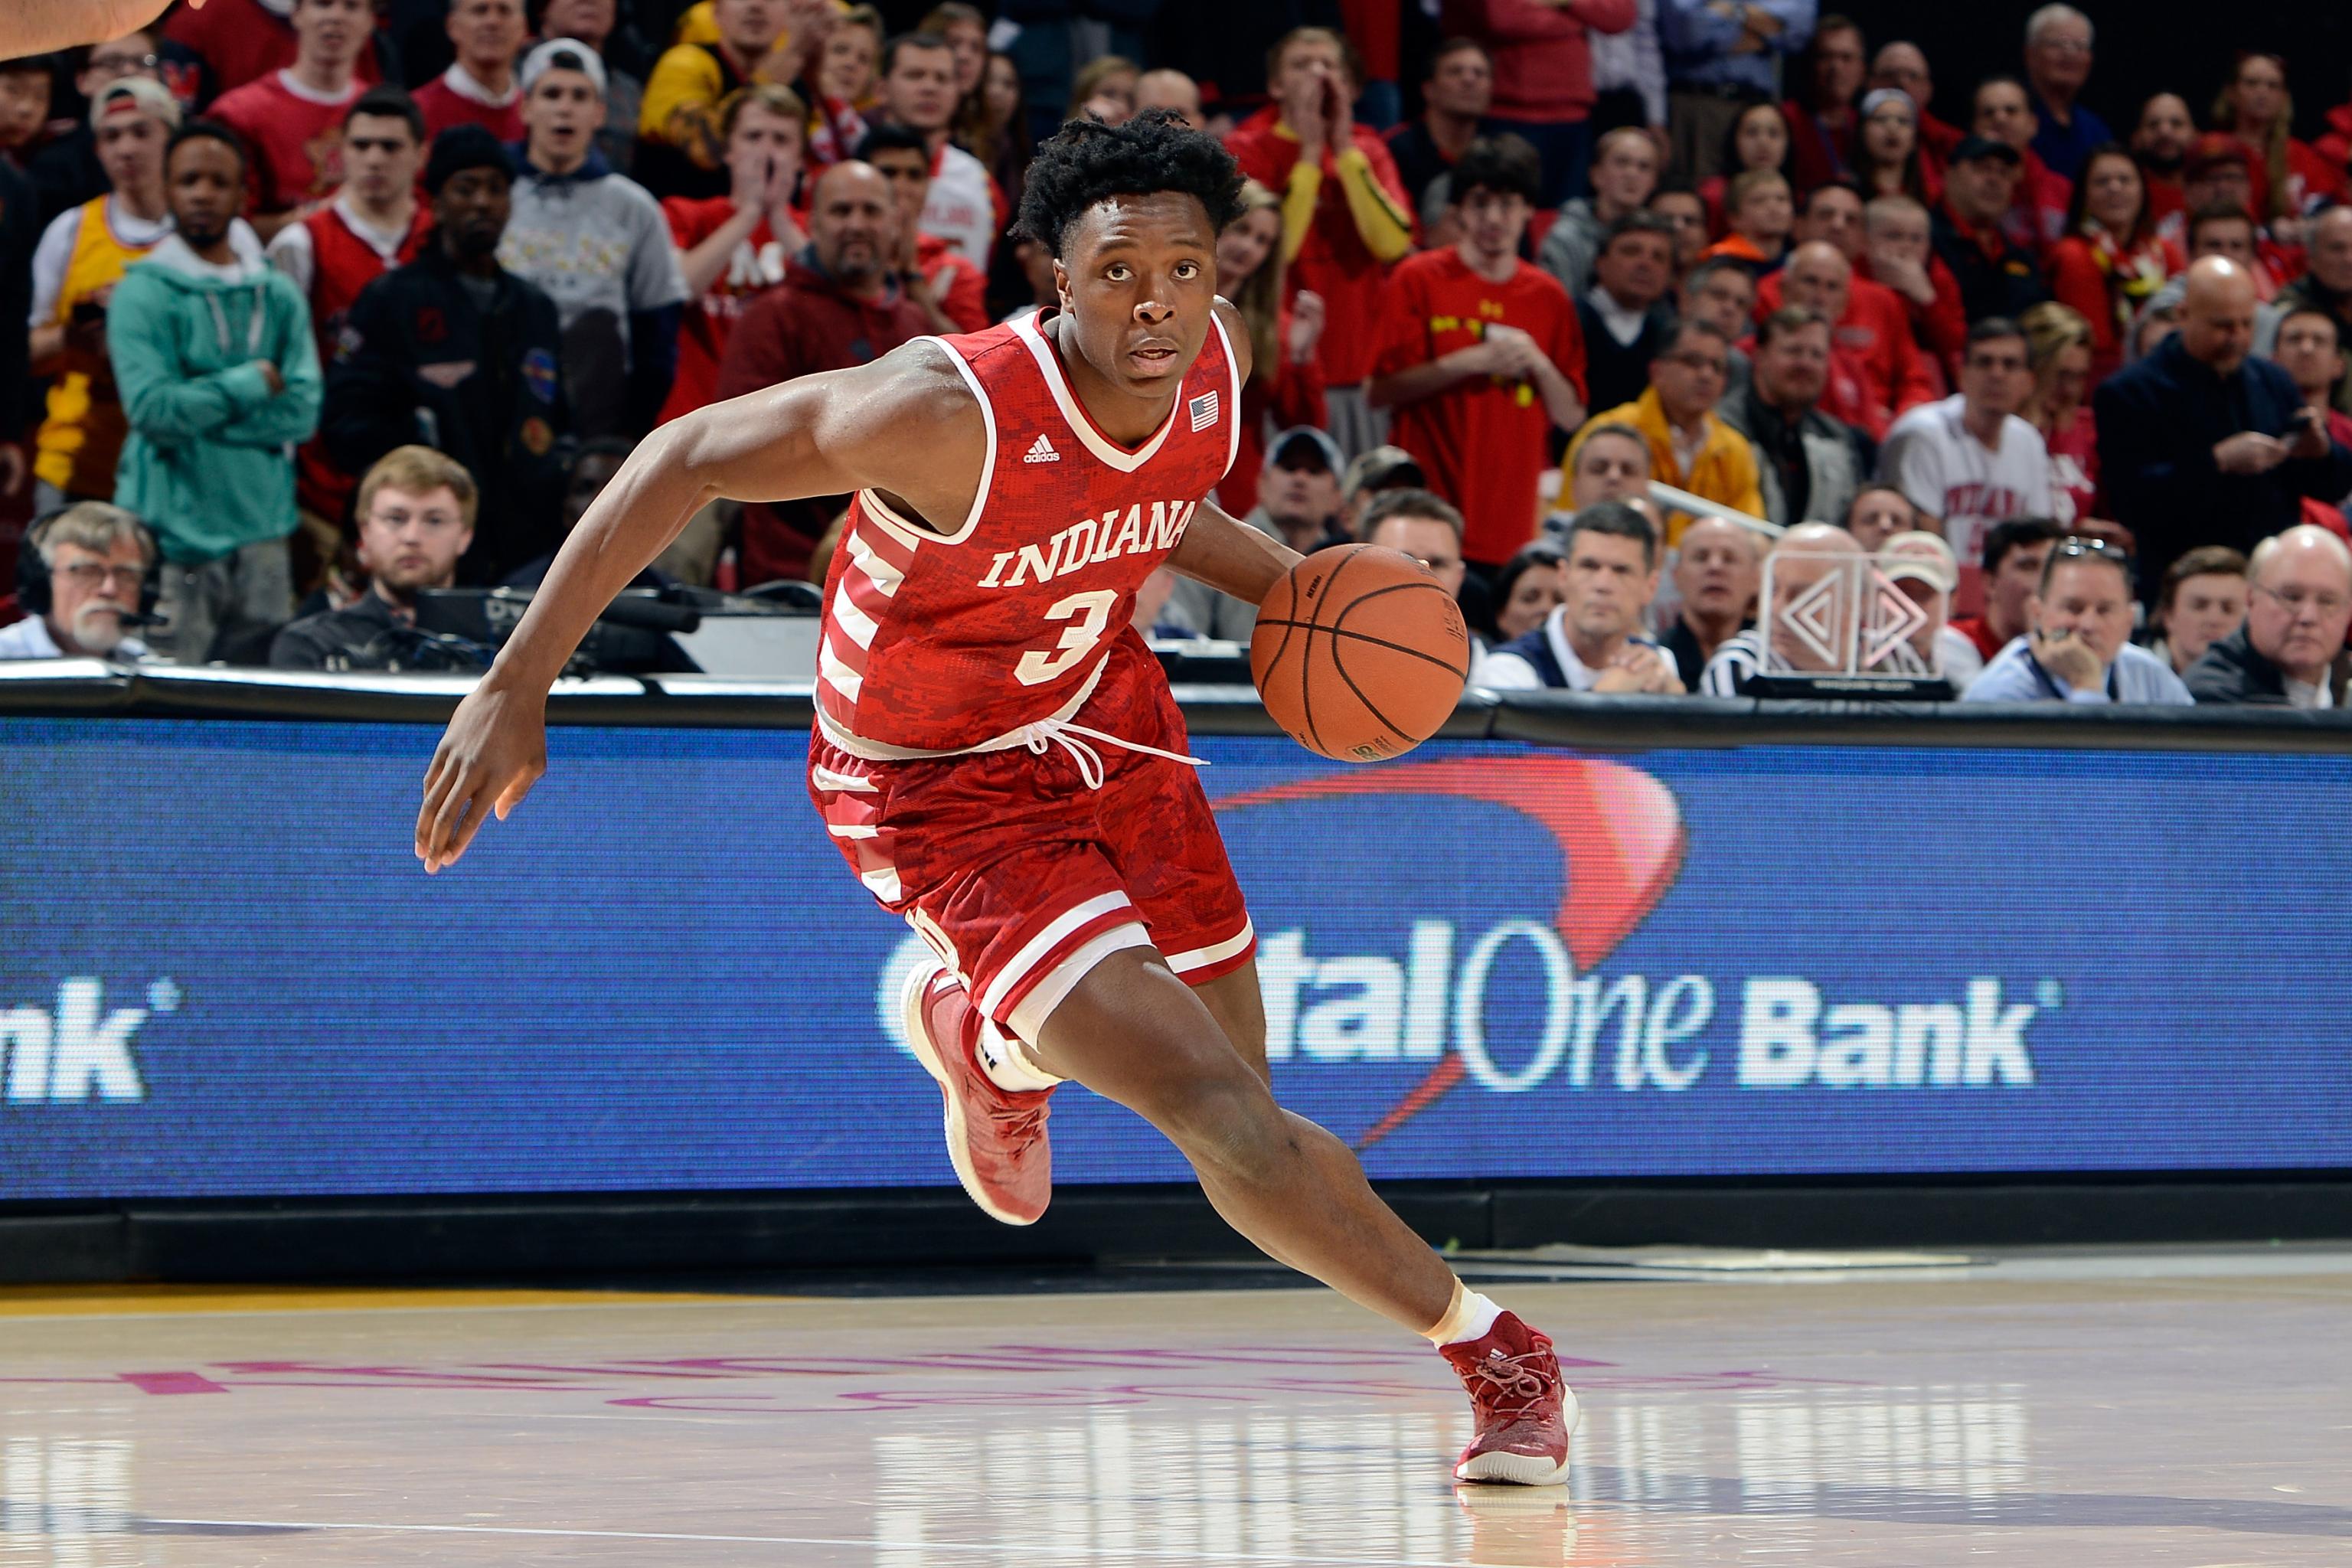 Where former Indiana basketball player OG Anunoby ranked in ESPN's